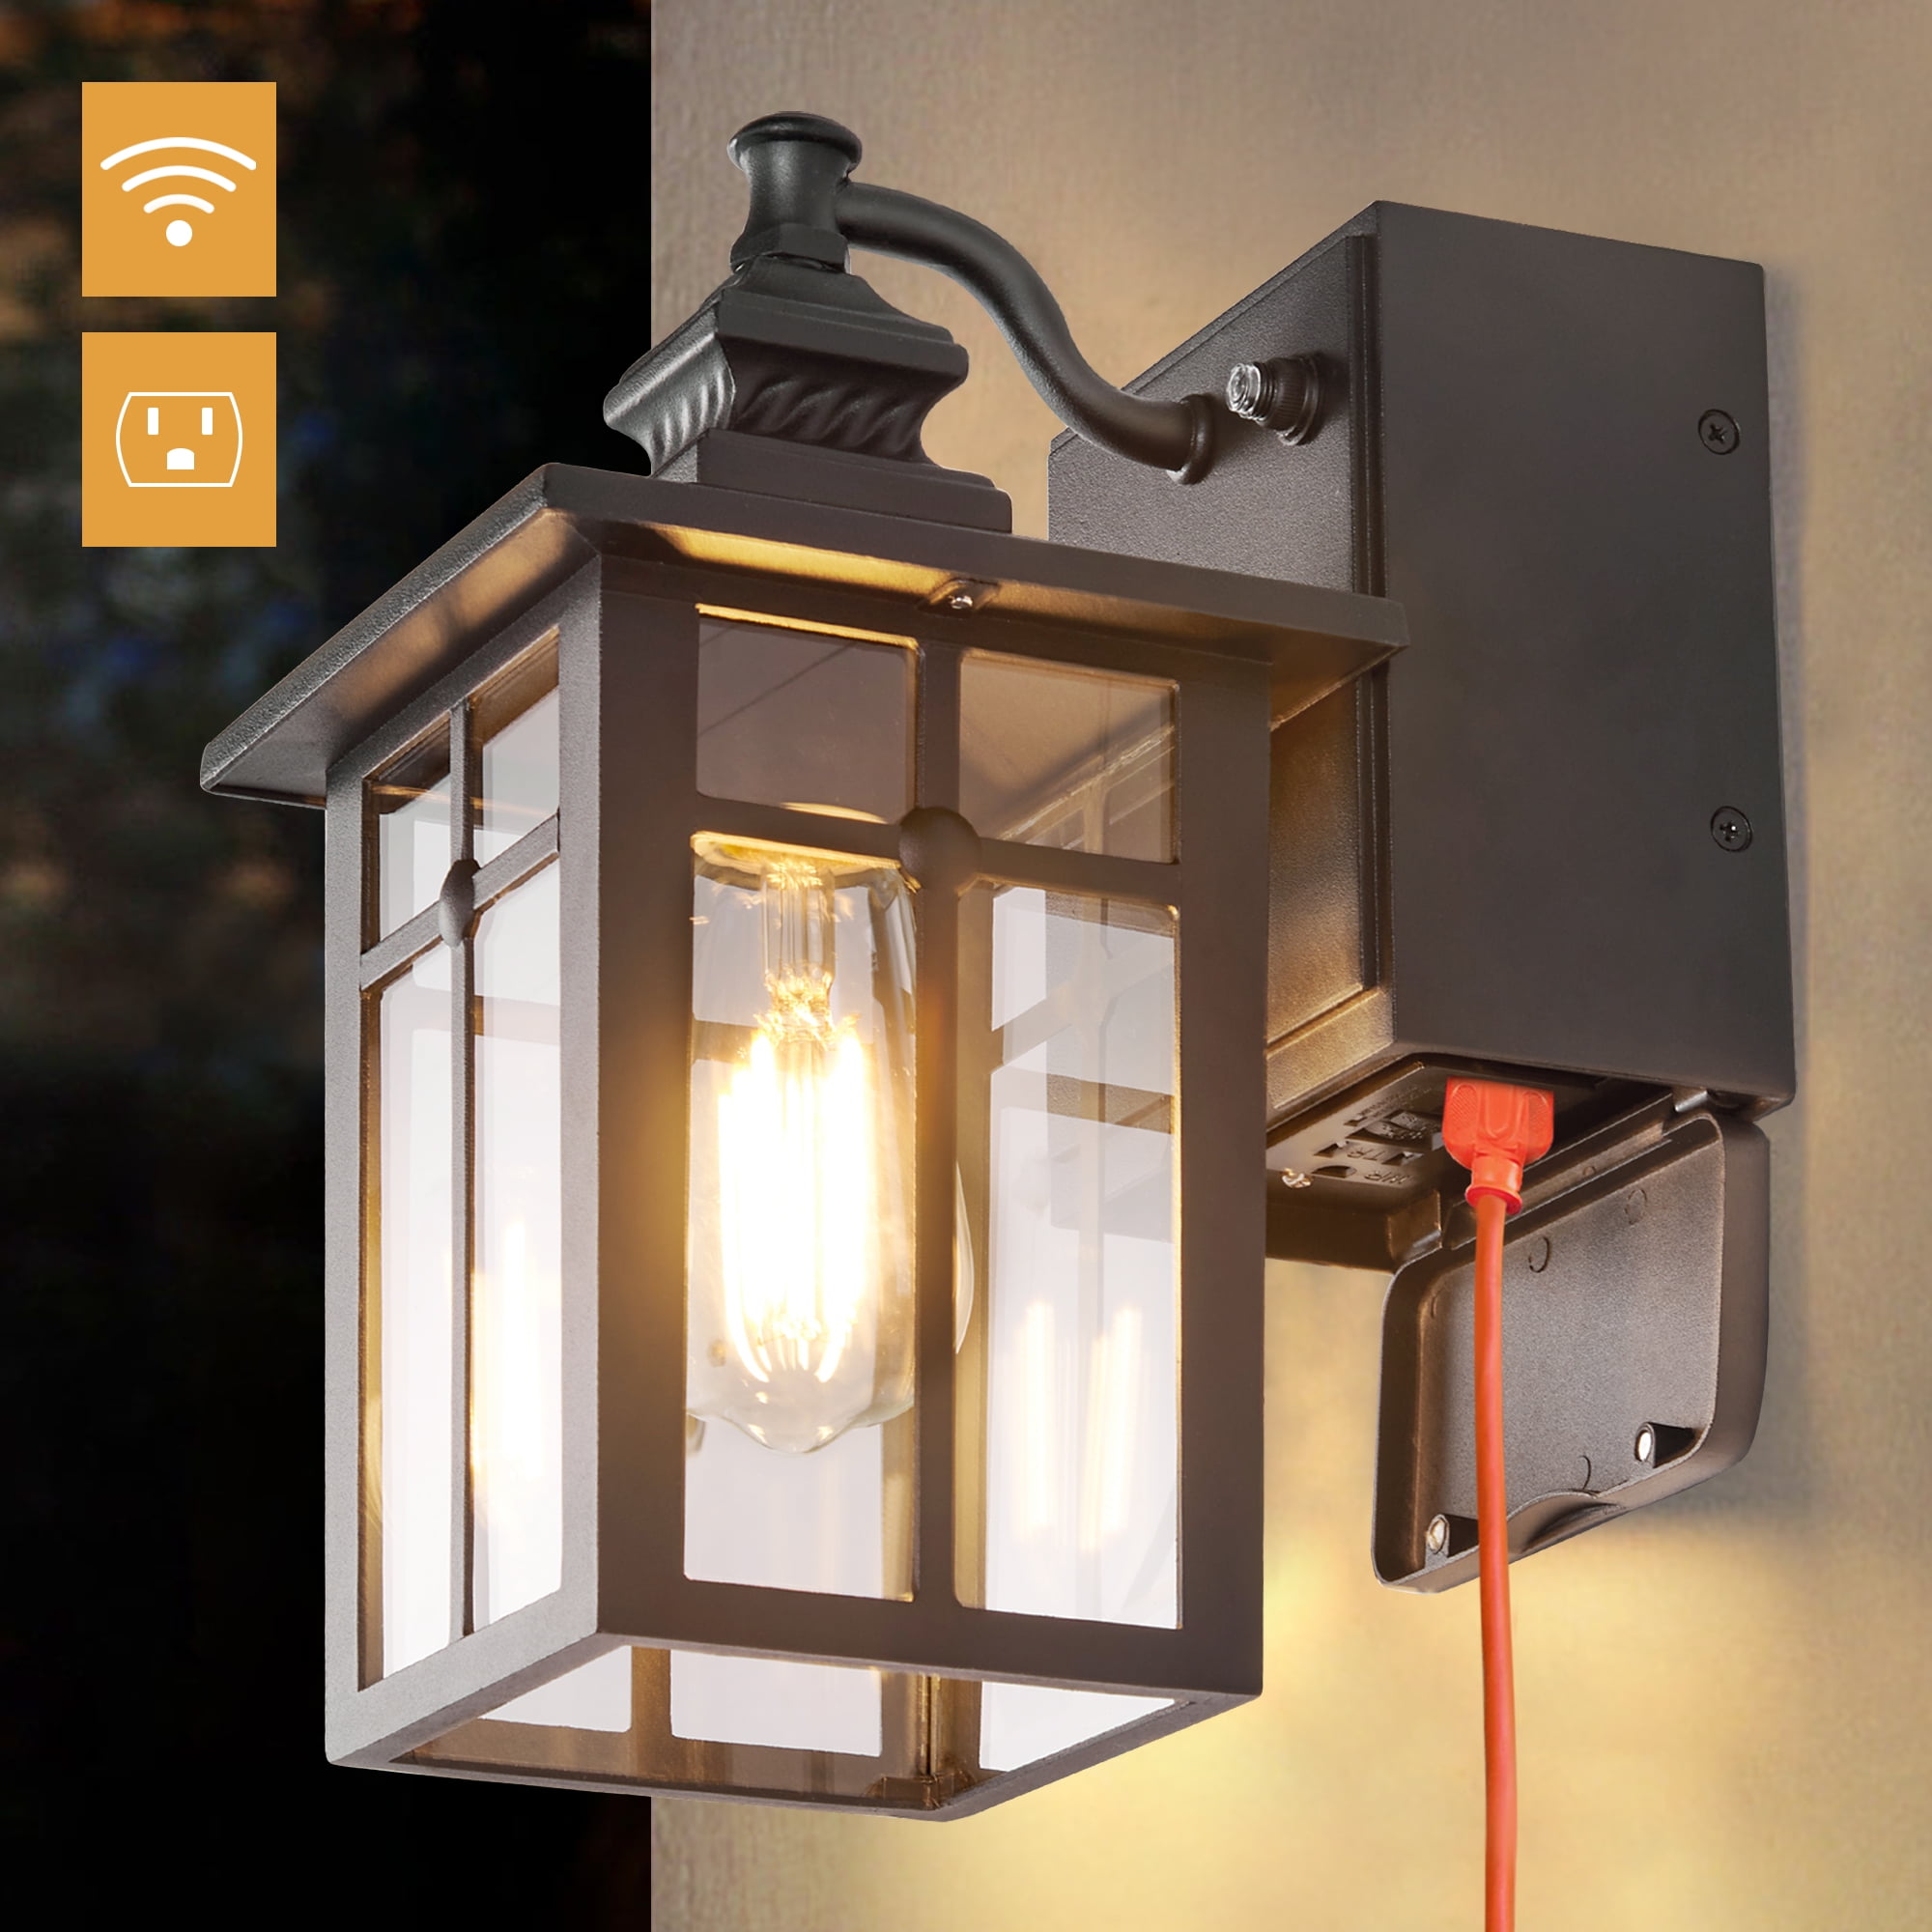 SIEPUNK Porch Light Outlet, Dusk to Dawn Outdoor Light with Outlet, Anti-Rust Outdoor Wall Lantern Exterior Light Fixture, Outside Lights for House Front Door Patio Garage, Bulb Included - Walmart.com